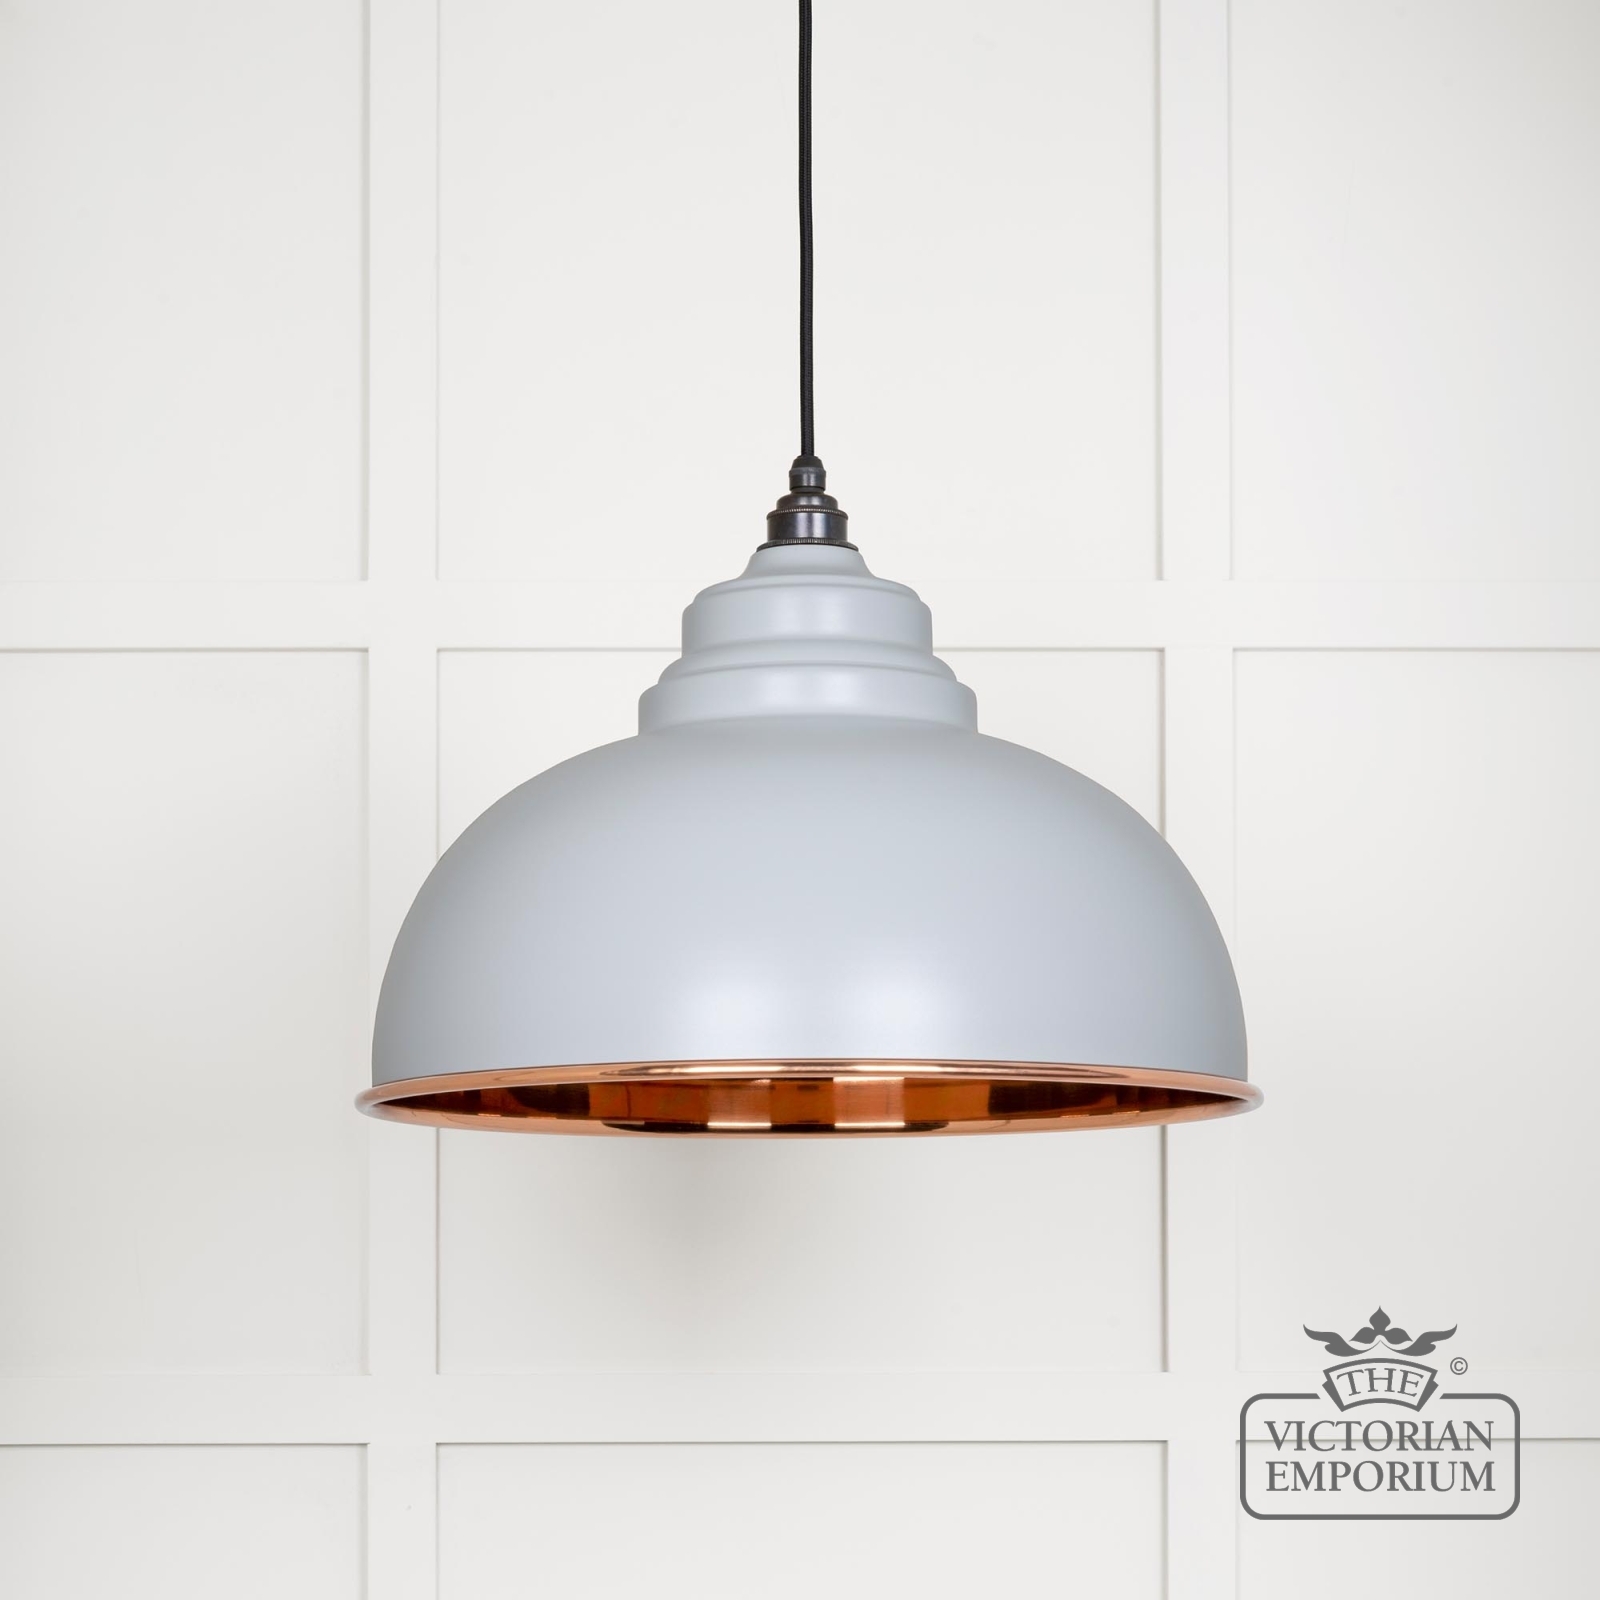 Harlow pendant light in smooth copper with birch exterior